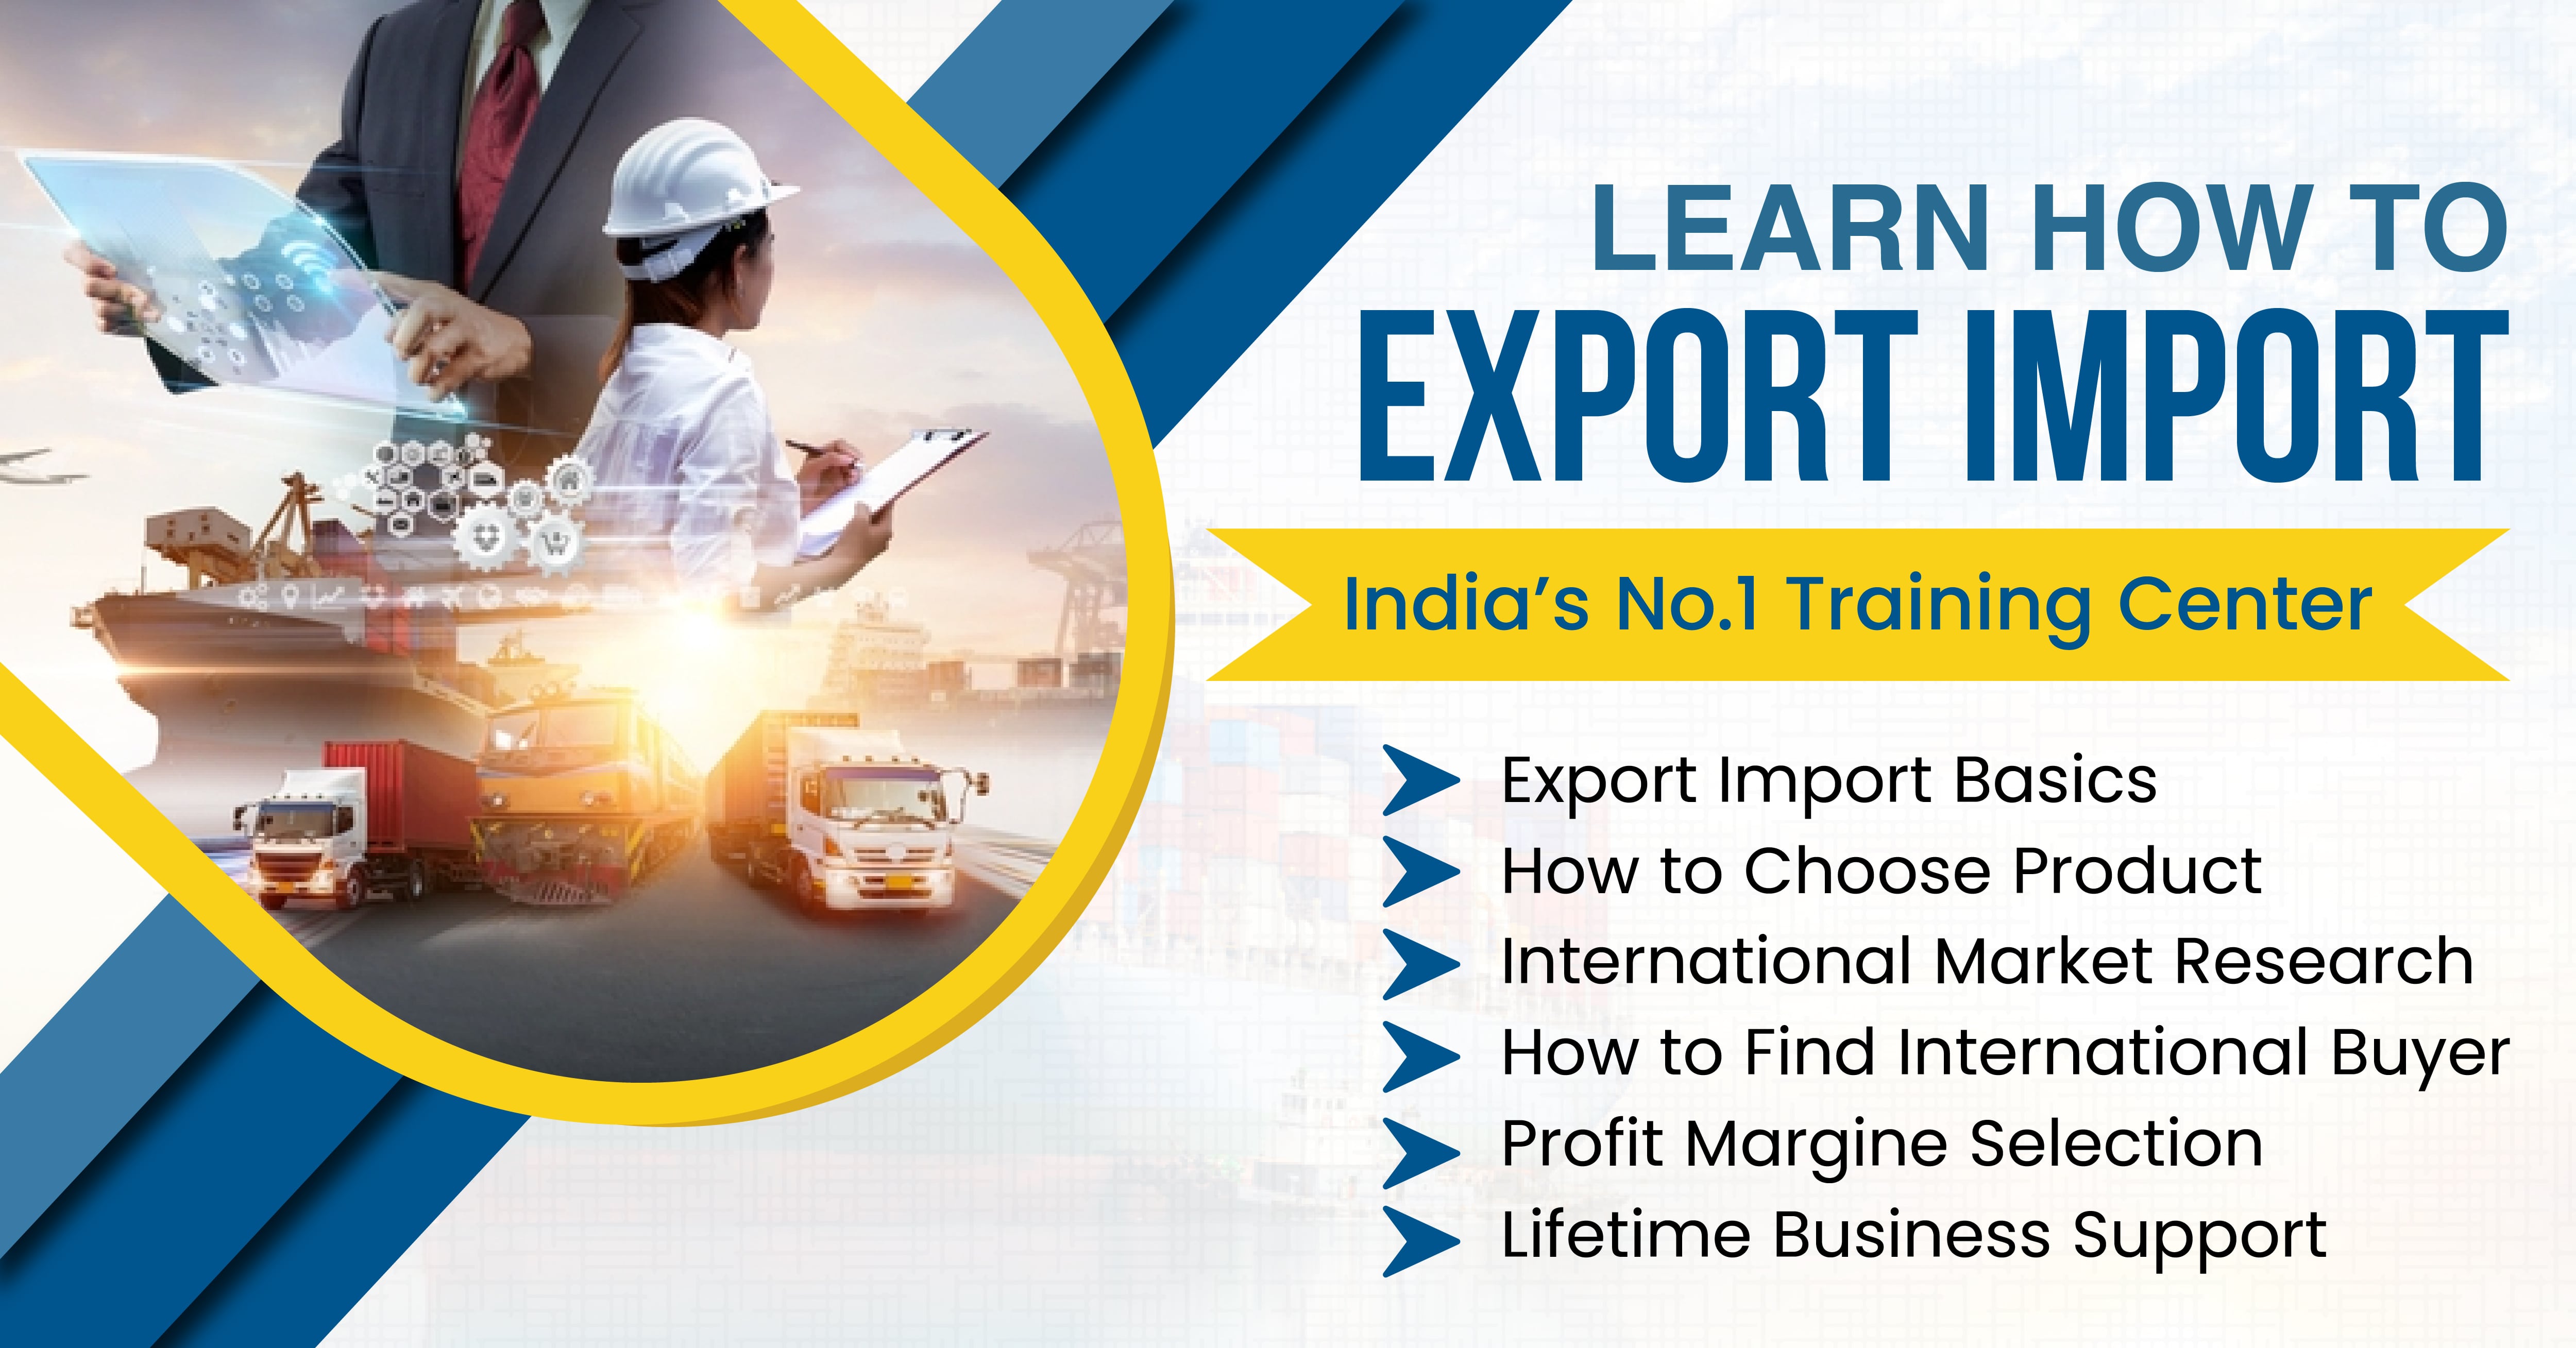 Start and Setup Your Export Import Business with training in Jaipur, Jaipur, Rajasthan, India